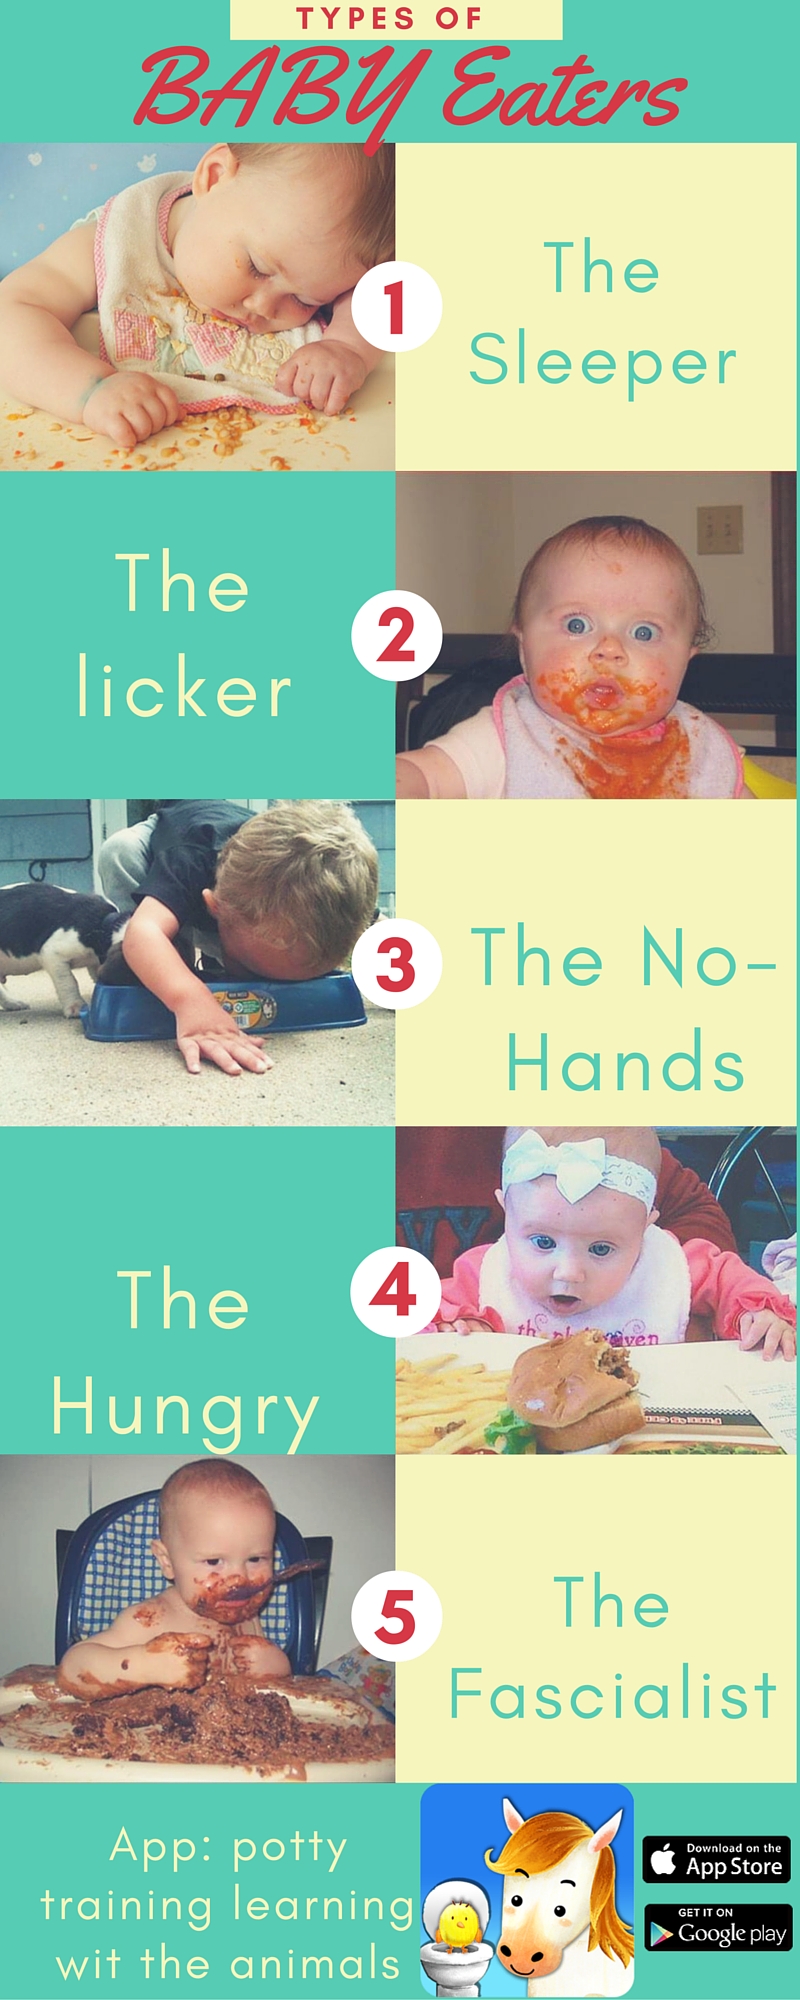 5 types of baby eaters